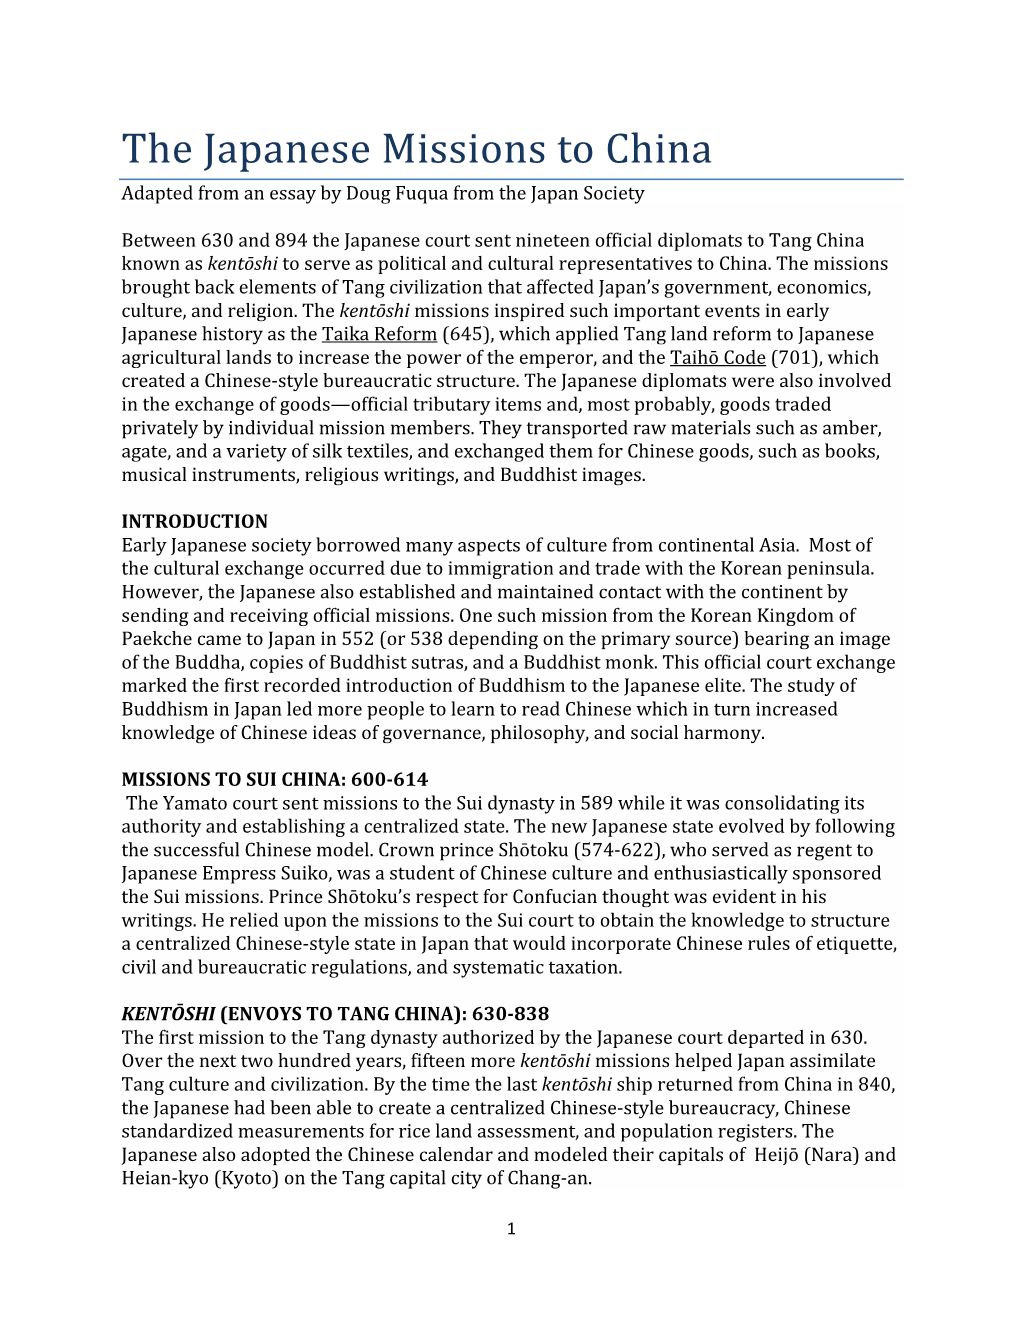 The Japanese Missions to China Adapted from an Essay by Doug Fuqua from the Japan Society